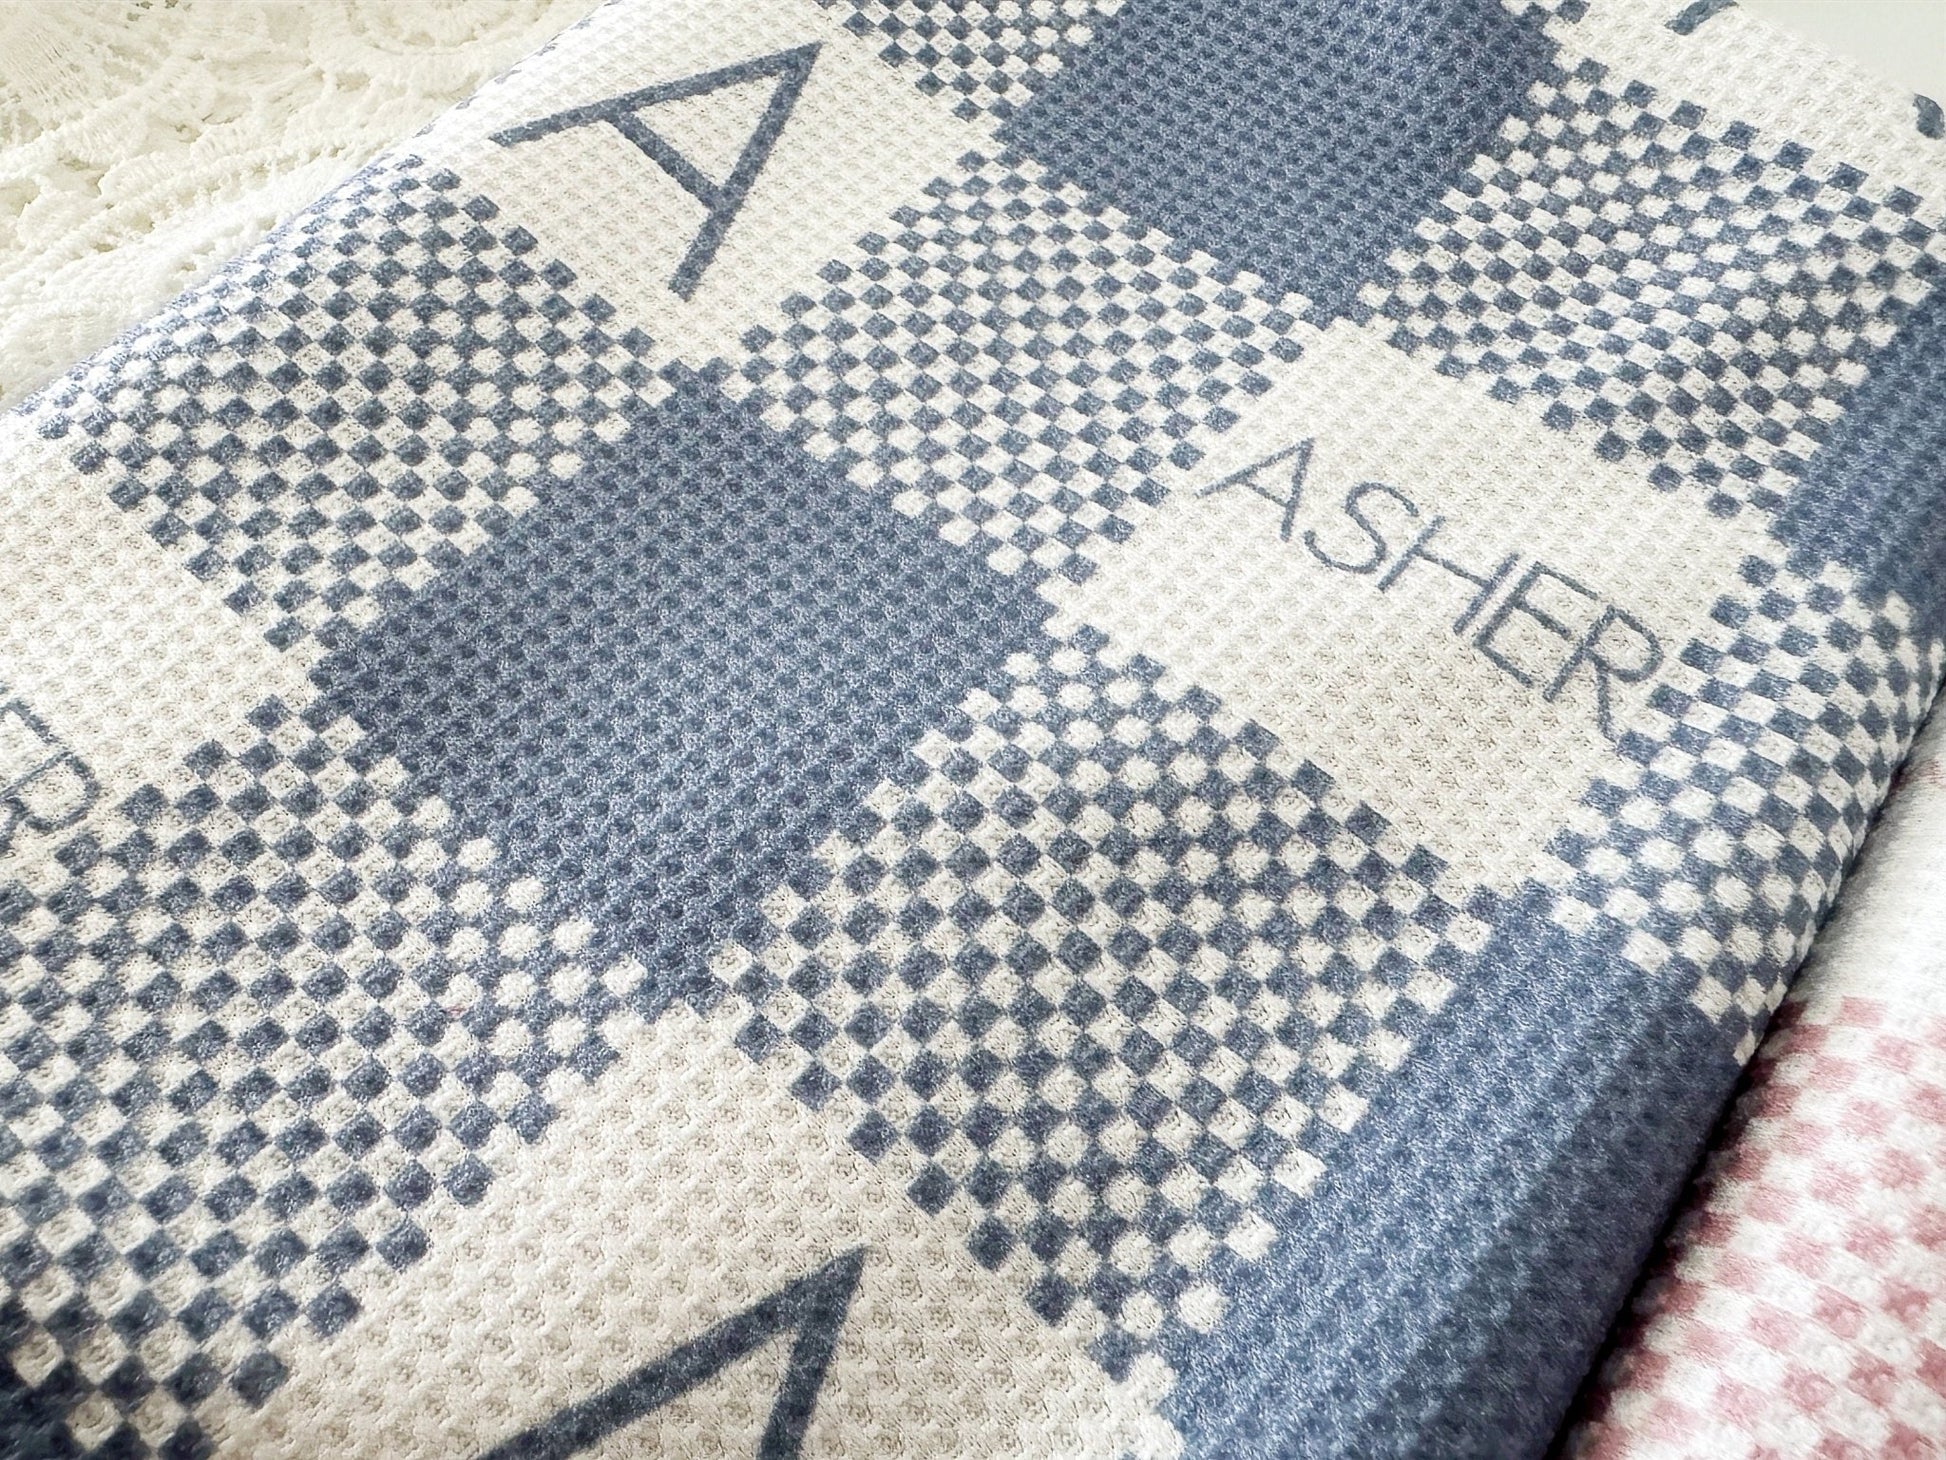 Waffle Baby Blanket Blue Personalized Checkered Plaid Monogramed Baby Swaddle Baby Boy Blanket - Squishy Cheeks